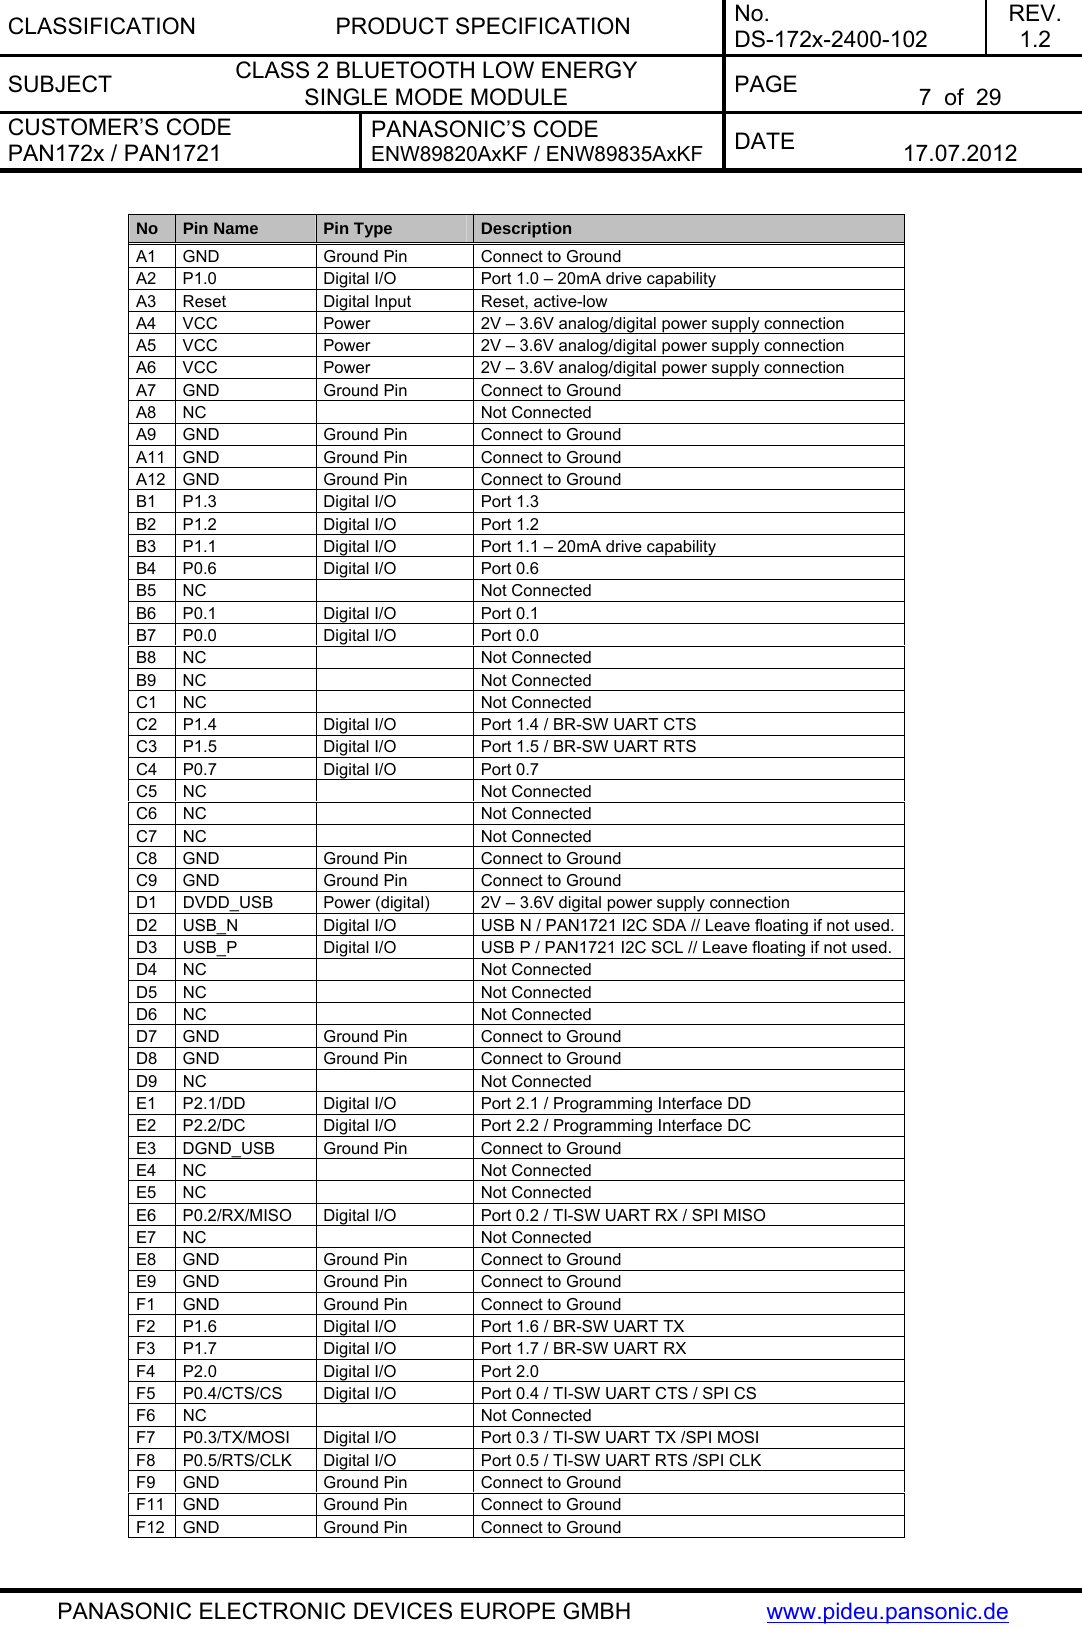 CLASSIFICATION PRODUCT SPECIFICATION No. DS-172x-2400-102 REV. 1.2 SUBJECT  CLASS 2 BLUETOOTH LOW ENERGY  SINGLE MODE MODULE  PAGE   7  of  29 CUSTOMER’S CODE PAN172x / PAN1721 PANASONIC’S CODE ENW89820AxKF / ENW89835AxKF  DATE   17.07.2012   PANASONIC ELECTRONIC DEVICES EUROPE GMBH  www.pideu.pansonic.de  No  Pin Name  Pin Type  Description A1  GND  Ground Pin  Connect to Ground A2  P1.0  Digital I/O  Port 1.0 – 20mA drive capability A3  Reset  Digital Input  Reset, active-low A4  VCC  Power  2V – 3.6V analog/digital power supply connection A5  VCC  Power  2V – 3.6V analog/digital power supply connection A6  VCC  Power  2V – 3.6V analog/digital power supply connection A7  GND  Ground Pin  Connect to Ground A8 NC    Not Connected A9  GND  Ground Pin  Connect to Ground A11  GND  Ground Pin  Connect to Ground A12  GND  Ground Pin  Connect to Ground B1  P1.3  Digital I/O  Port 1.3 B2  P1.2  Digital I/O  Port 1.2 B3  P1.1  Digital I/O  Port 1.1 – 20mA drive capability B4  P0.6  Digital I/O  Port 0.6 B5 NC    Not Connected B6  P0.1  Digital I/O  Port 0.1 B7  P0.0  Digital I/O  Port 0.0 B8 NC    Not Connected B9 NC    Not Connected C1 NC    Not Connected C2  P1.4  Digital I/O  Port 1.4 / BR-SW UART CTS C3  P1.5  Digital I/O  Port 1.5 / BR-SW UART RTS C4  P0.7  Digital I/O  Port 0.7 C5 NC    Not Connected C6 NC    Not Connected C7 NC    Not Connected C8  GND  Ground Pin  Connect to Ground C9  GND  Ground Pin  Connect to Ground D1  DVDD_USB  Power (digital)  2V – 3.6V digital power supply connection D2  USB_N  Digital I/O  USB N / PAN1721 I2C SDA // Leave floating if not used. D3  USB_P  Digital I/O  USB P / PAN1721 I2C SCL // Leave floating if not used. D4 NC    Not Connected D5 NC    Not Connected D6 NC    Not Connected D7  GND  Ground Pin  Connect to Ground D8  GND  Ground Pin  Connect to Ground D9 NC    Not Connected E1  P2.1/DD  Digital I/O  Port 2.1 / Programming Interface DD E2  P2.2/DC  Digital I/O  Port 2.2 / Programming Interface DC E3  DGND_USB  Ground Pin  Connect to Ground E4 NC    Not Connected E5 NC    Not Connected E6 P0.2/RX/MISO  Digital I/O  Port 0.2 / TI-SW UART RX / SPI MISO E7 NC    Not Connected E8  GND  Ground Pin  Connect to Ground E9  GND  Ground Pin  Connect to Ground F1  GND  Ground Pin  Connect to Ground F2  P1.6  Digital I/O  Port 1.6 / BR-SW UART TX F3  P1.7  Digital I/O  Port 1.7 / BR-SW UART RX F4  P2.0  Digital I/O  Port 2.0 F5  P0.4/CTS/CS  Digital I/O  Port 0.4 / TI-SW UART CTS / SPI CS F6 NC    Not Connected F7  P0.3/TX/MOSI  Digital I/O  Port 0.3 / TI-SW UART TX /SPI MOSI F8  P0.5/RTS/CLK  Digital I/O  Port 0.5 / TI-SW UART RTS /SPI CLK F9  GND  Ground Pin  Connect to Ground F11  GND  Ground Pin  Connect to Ground F12  GND  Ground Pin  Connect to Ground      